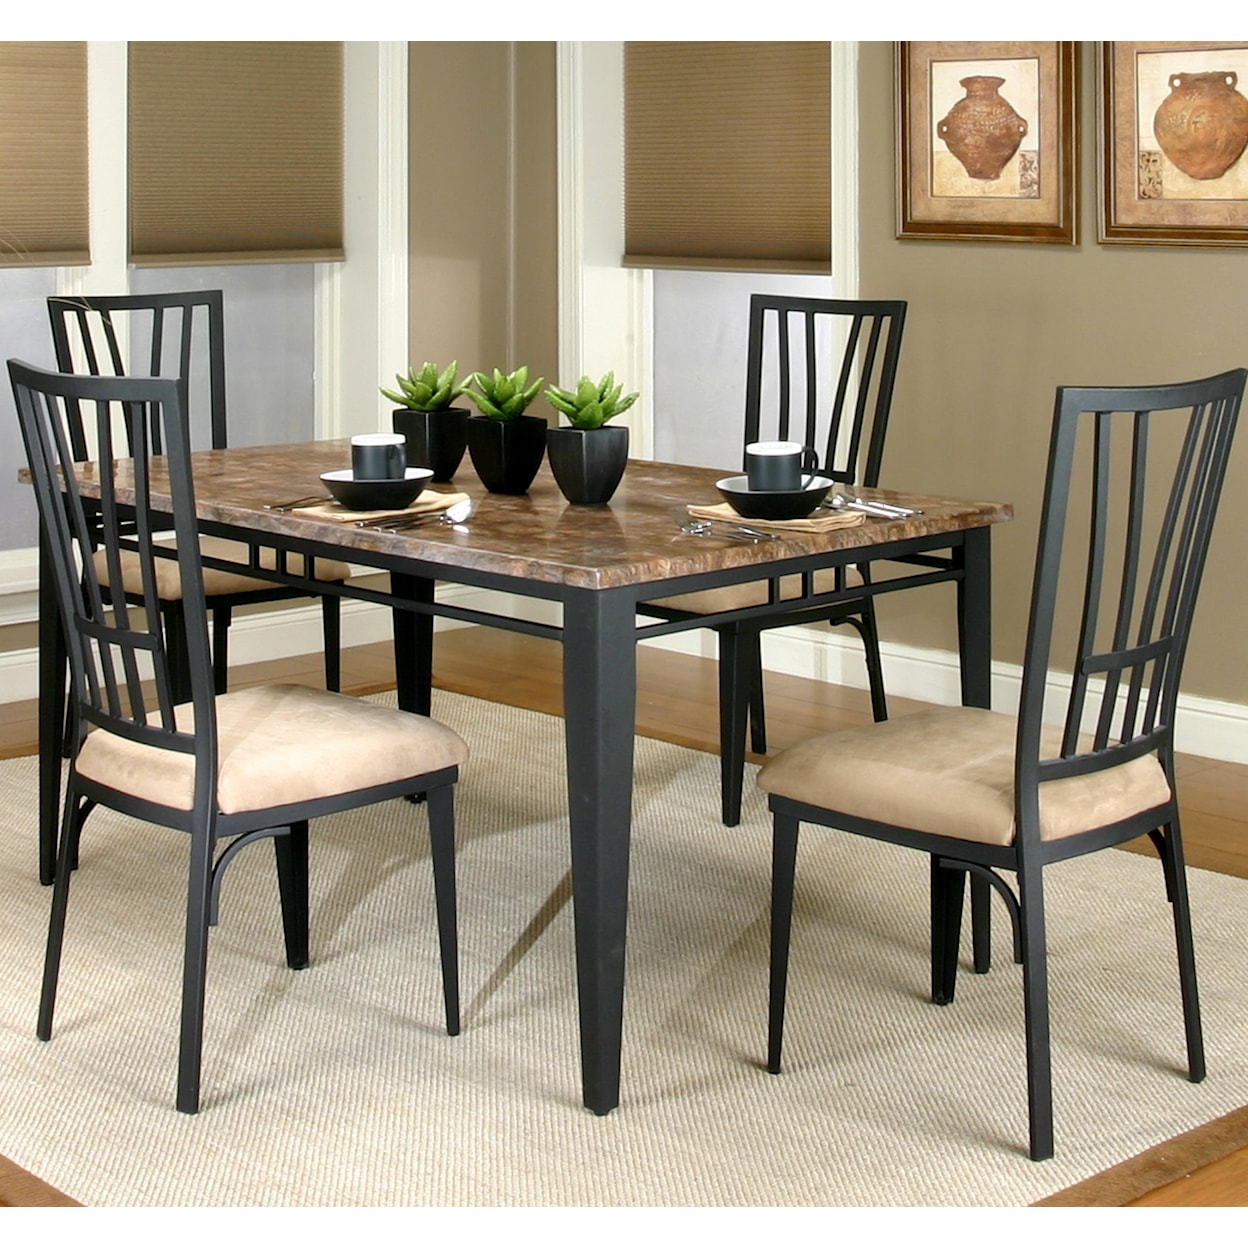 Cramco, Inc Cramco Trading Company - Lingo Table and Chair 5 Piece Set